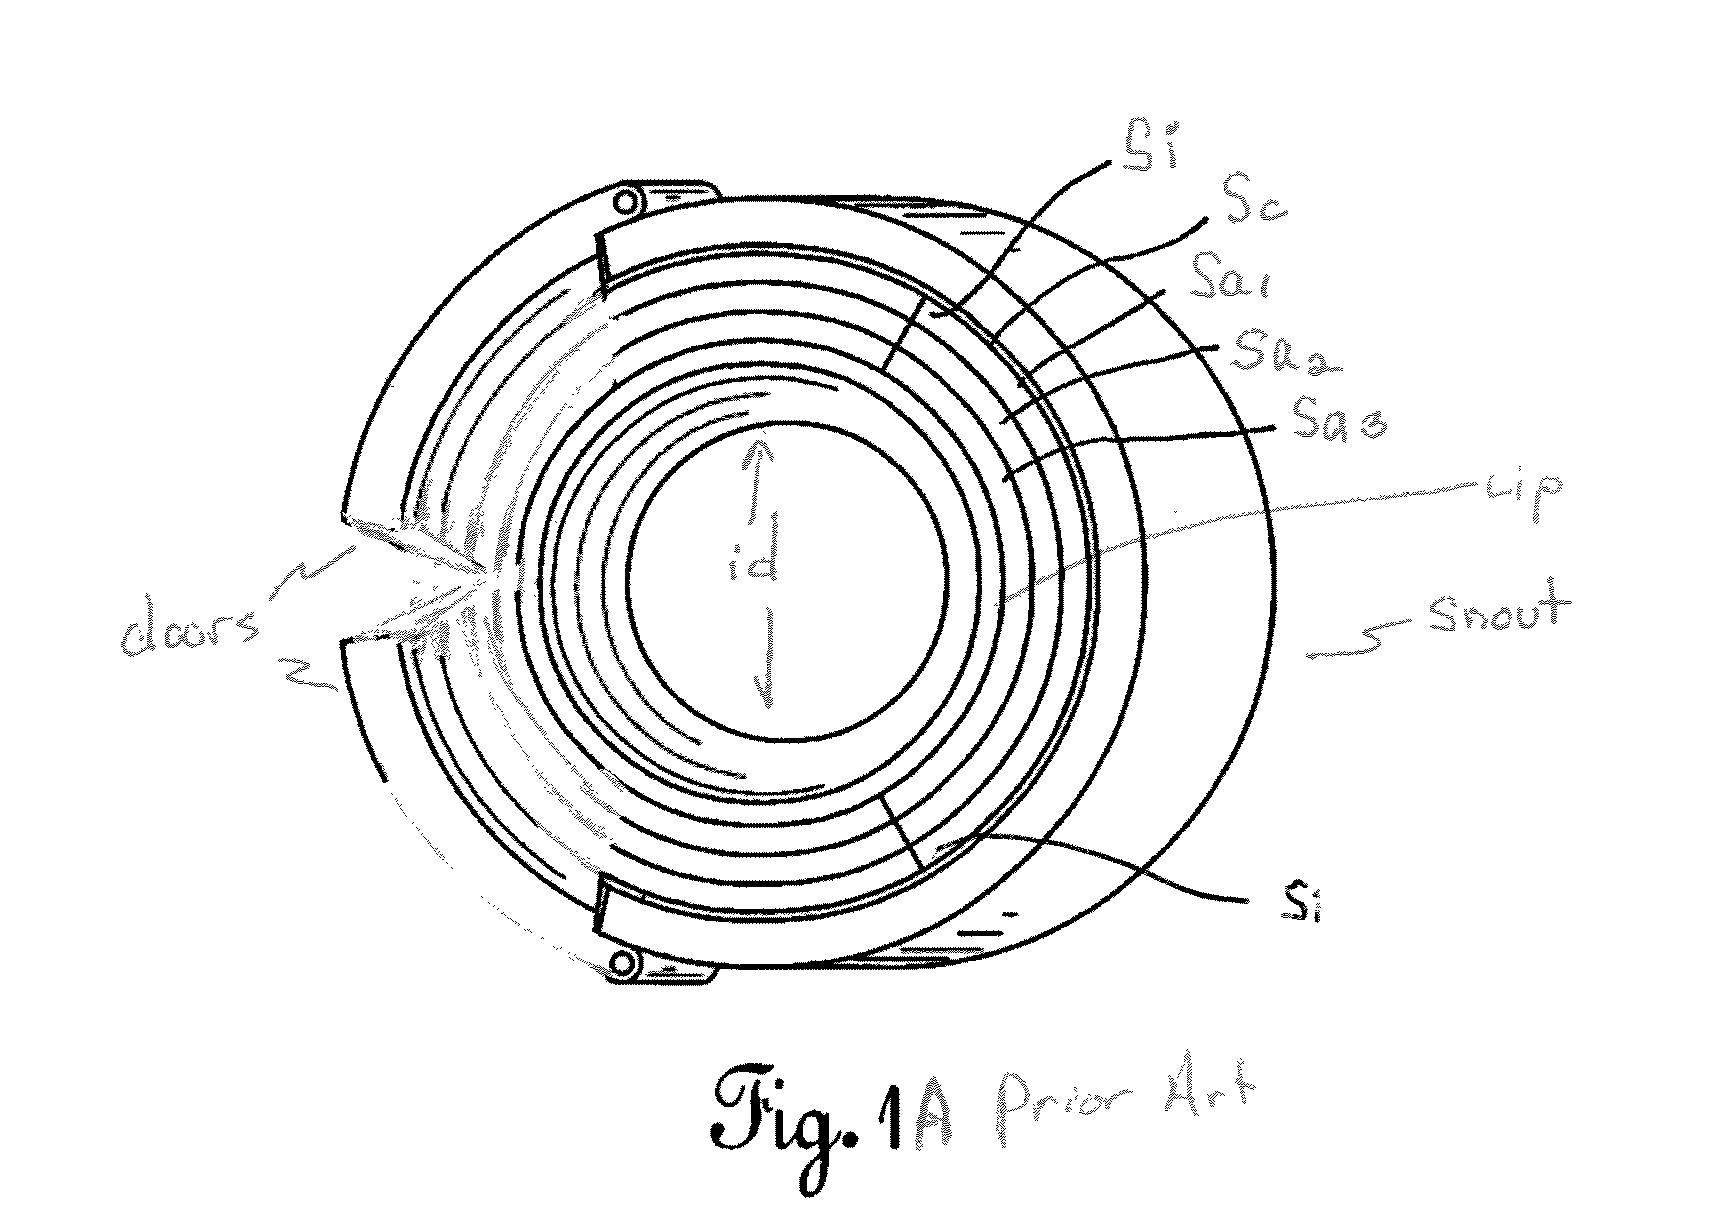 Integrated beam modifying assembly for use with a proton beam therapy machine